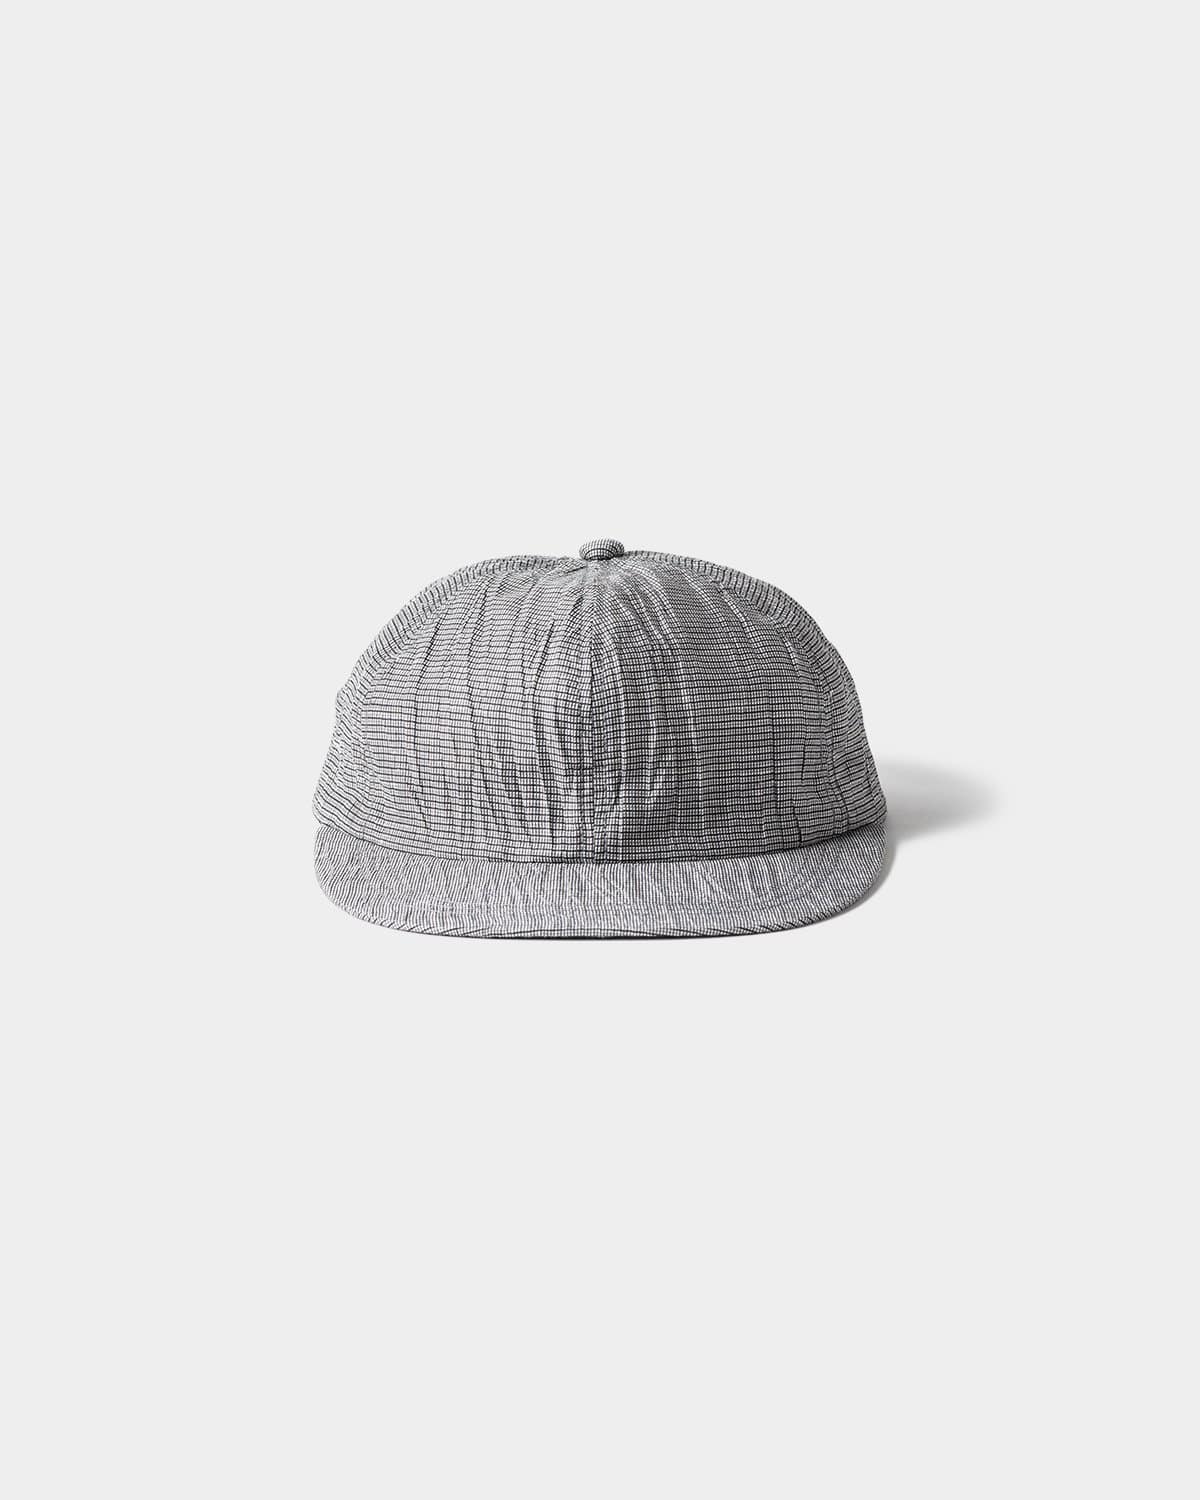 TIGHTBOOTH] FURROW 6 PANEL(Free Gray)｜ MSPCプロダクト ソート